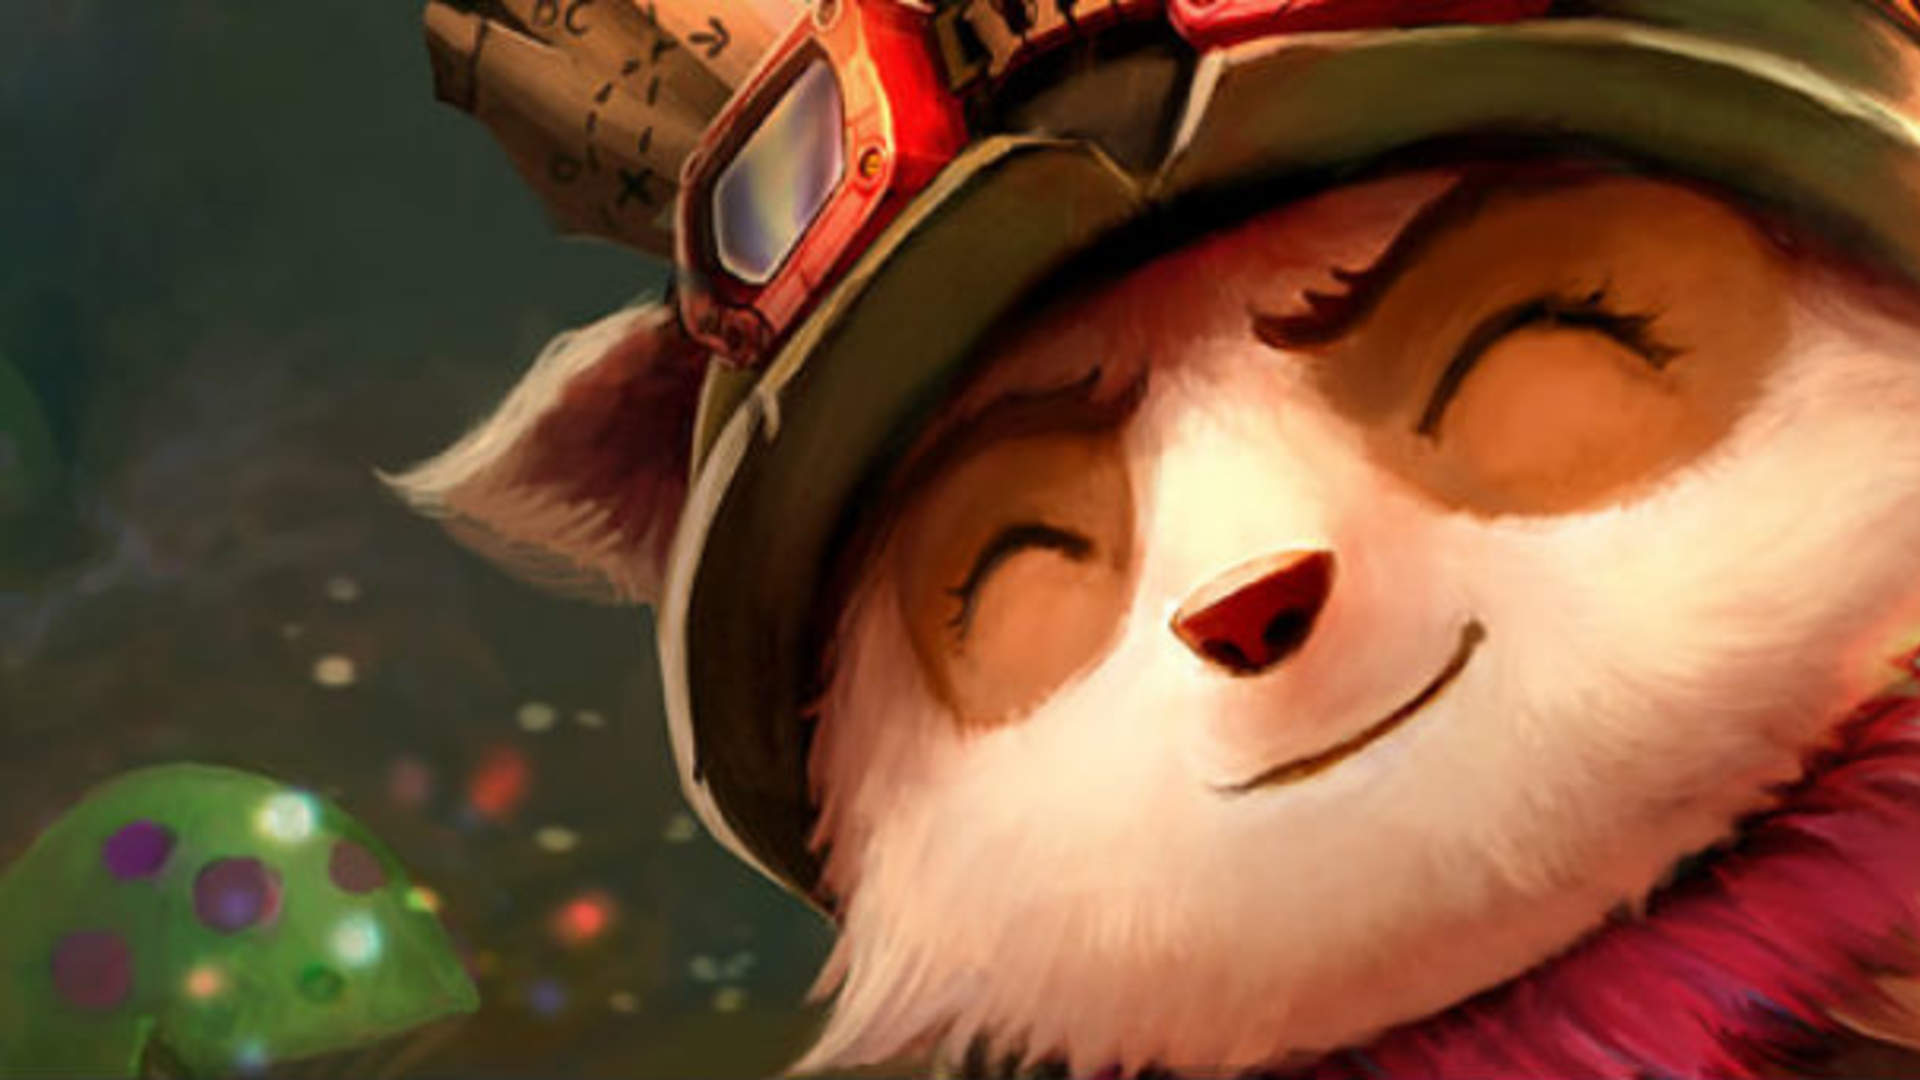 Game Based On League Of Legends - Teemo League Of Legends - HD Wallpaper 